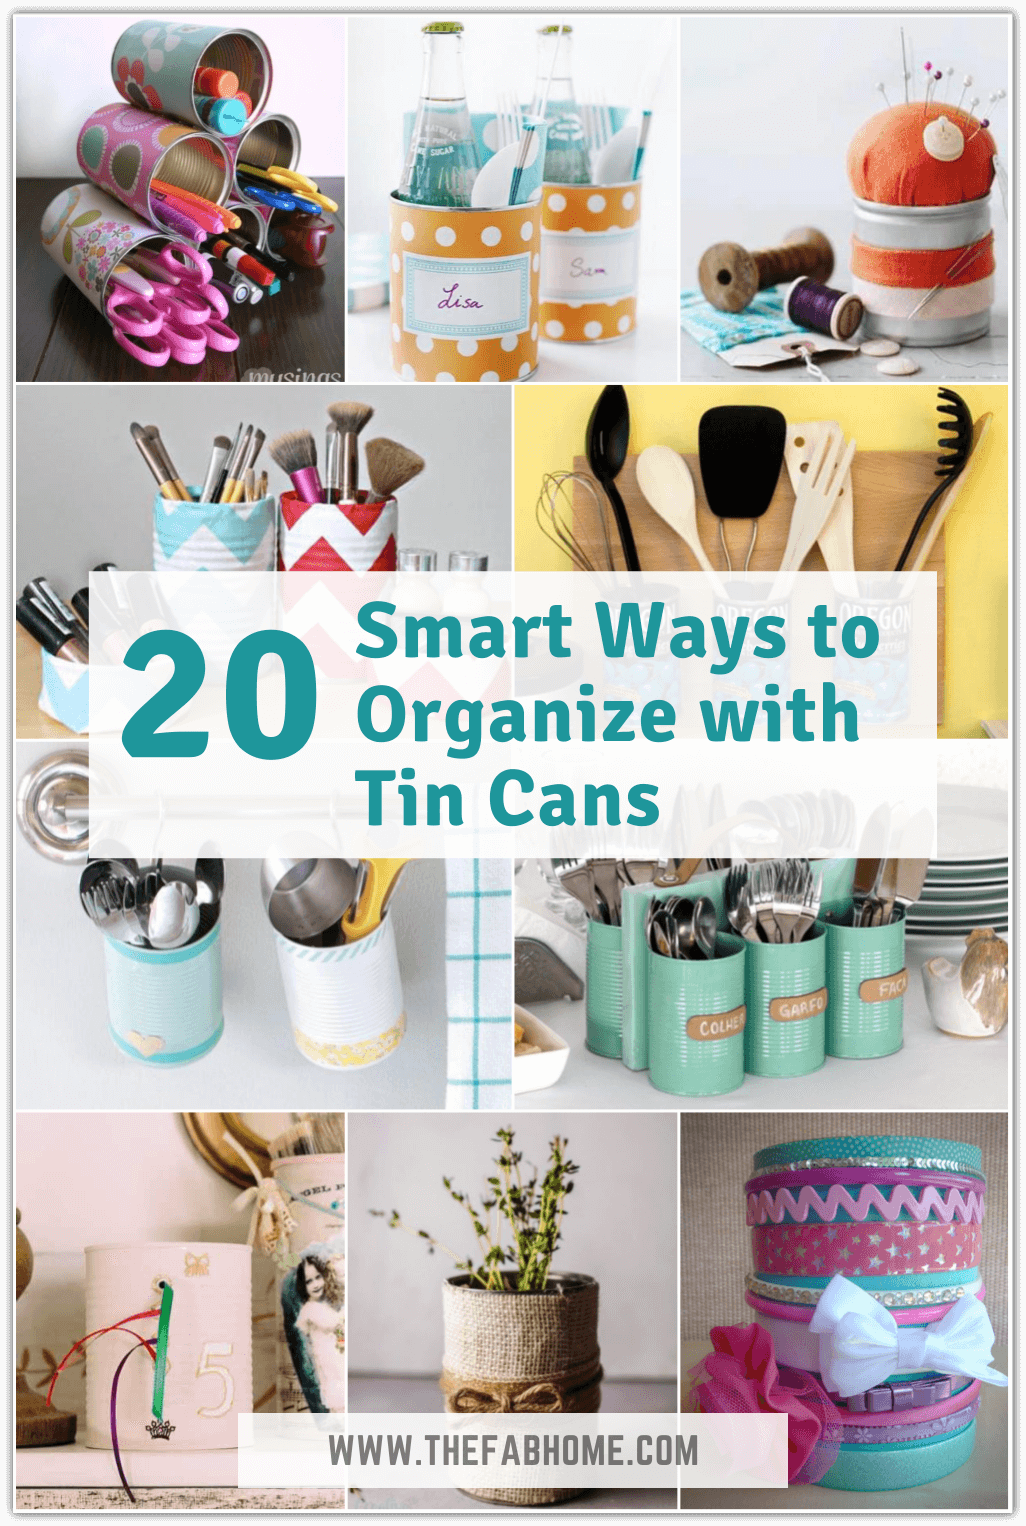 Do you have empty cans lying around? Whatever size of tin cans you have, make use of them with these 20 Super Smart Ways to Organize with Tin Cans! 